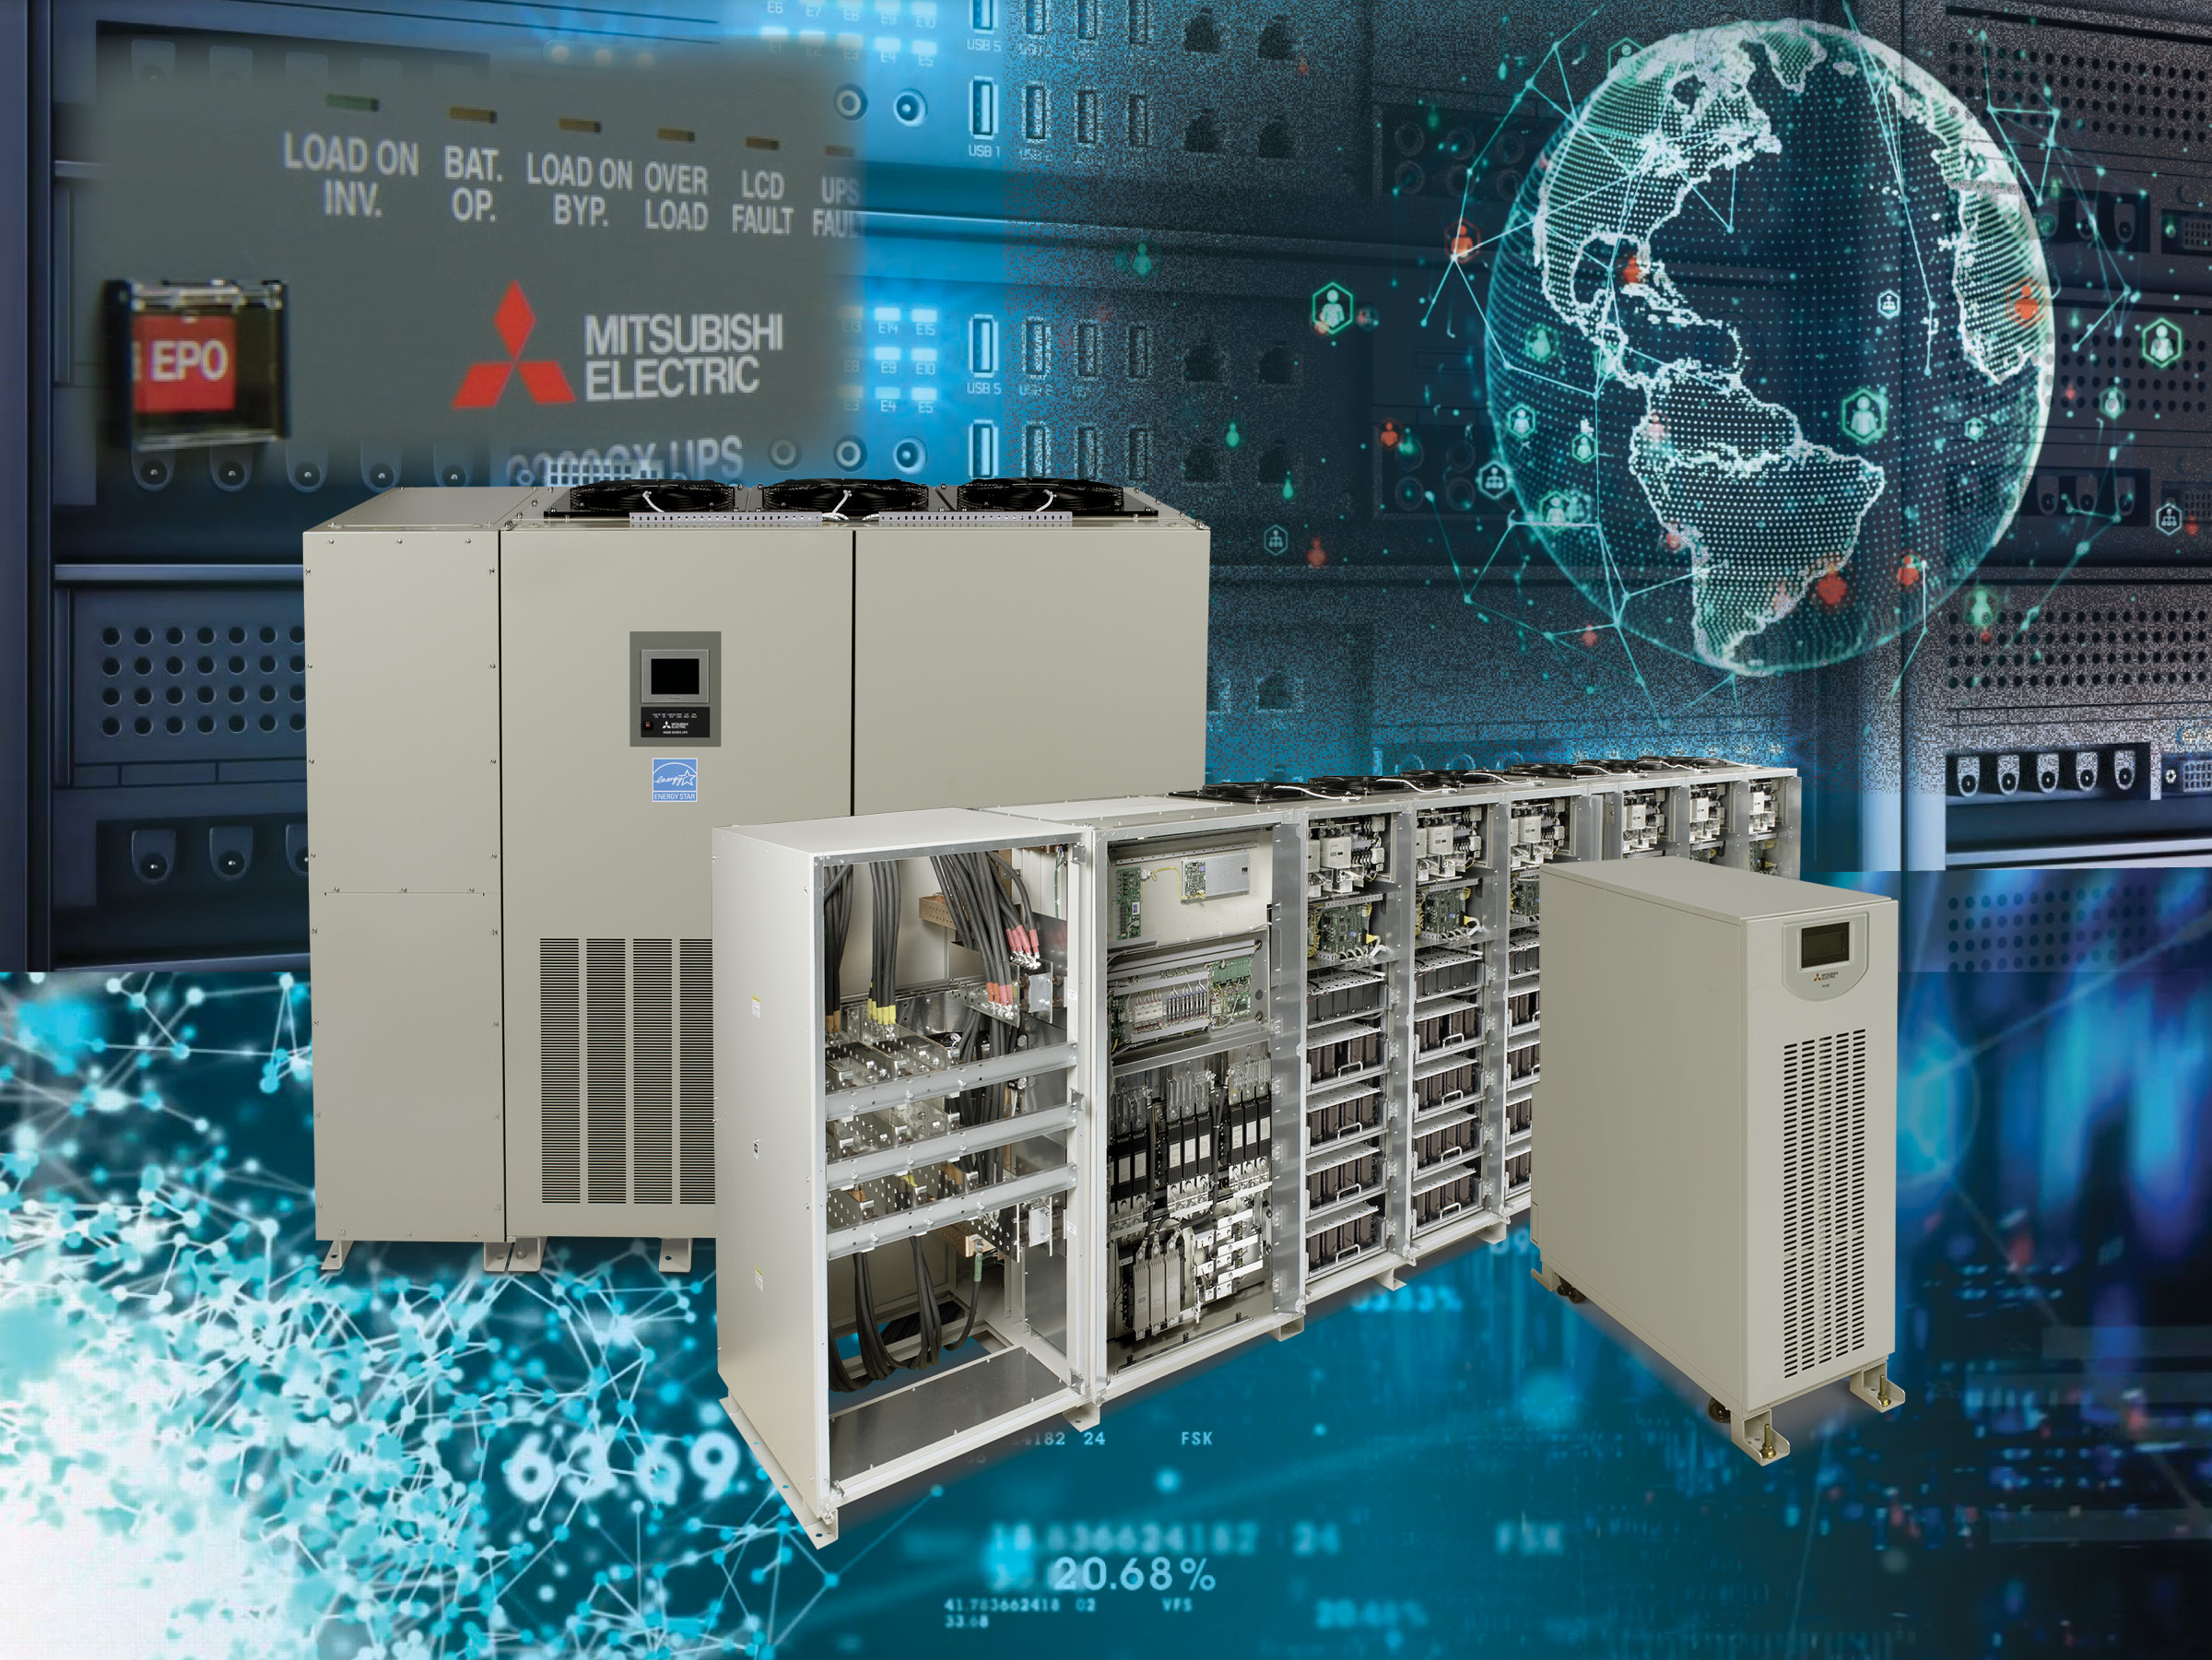 Mitsubishi Electric UPS products are highly regarded for their unsurpassed quality, reliability, and efficiency and set the benchmark for technical excellence.